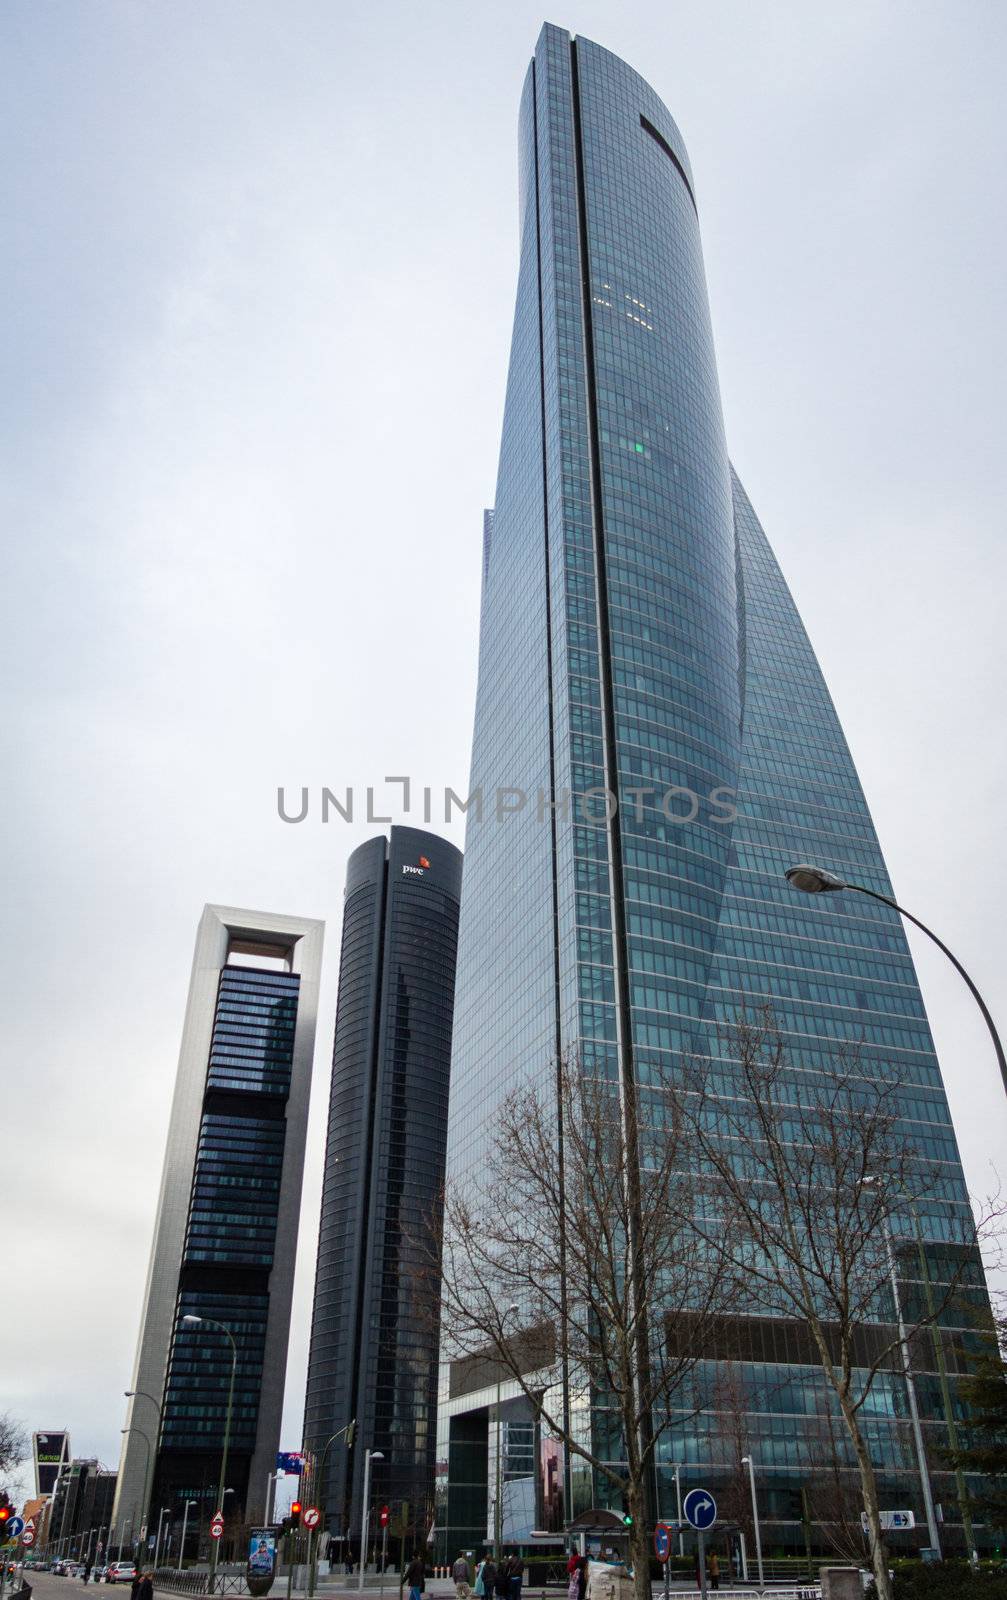 MADRID, SPAIN - MARCH 10 Cuatro Torres Business Area (CTBA), in Madrid, Spain, on March 10, 2013. View of Glass Tower, PwC Tower and Bankia Tower skyscrapers